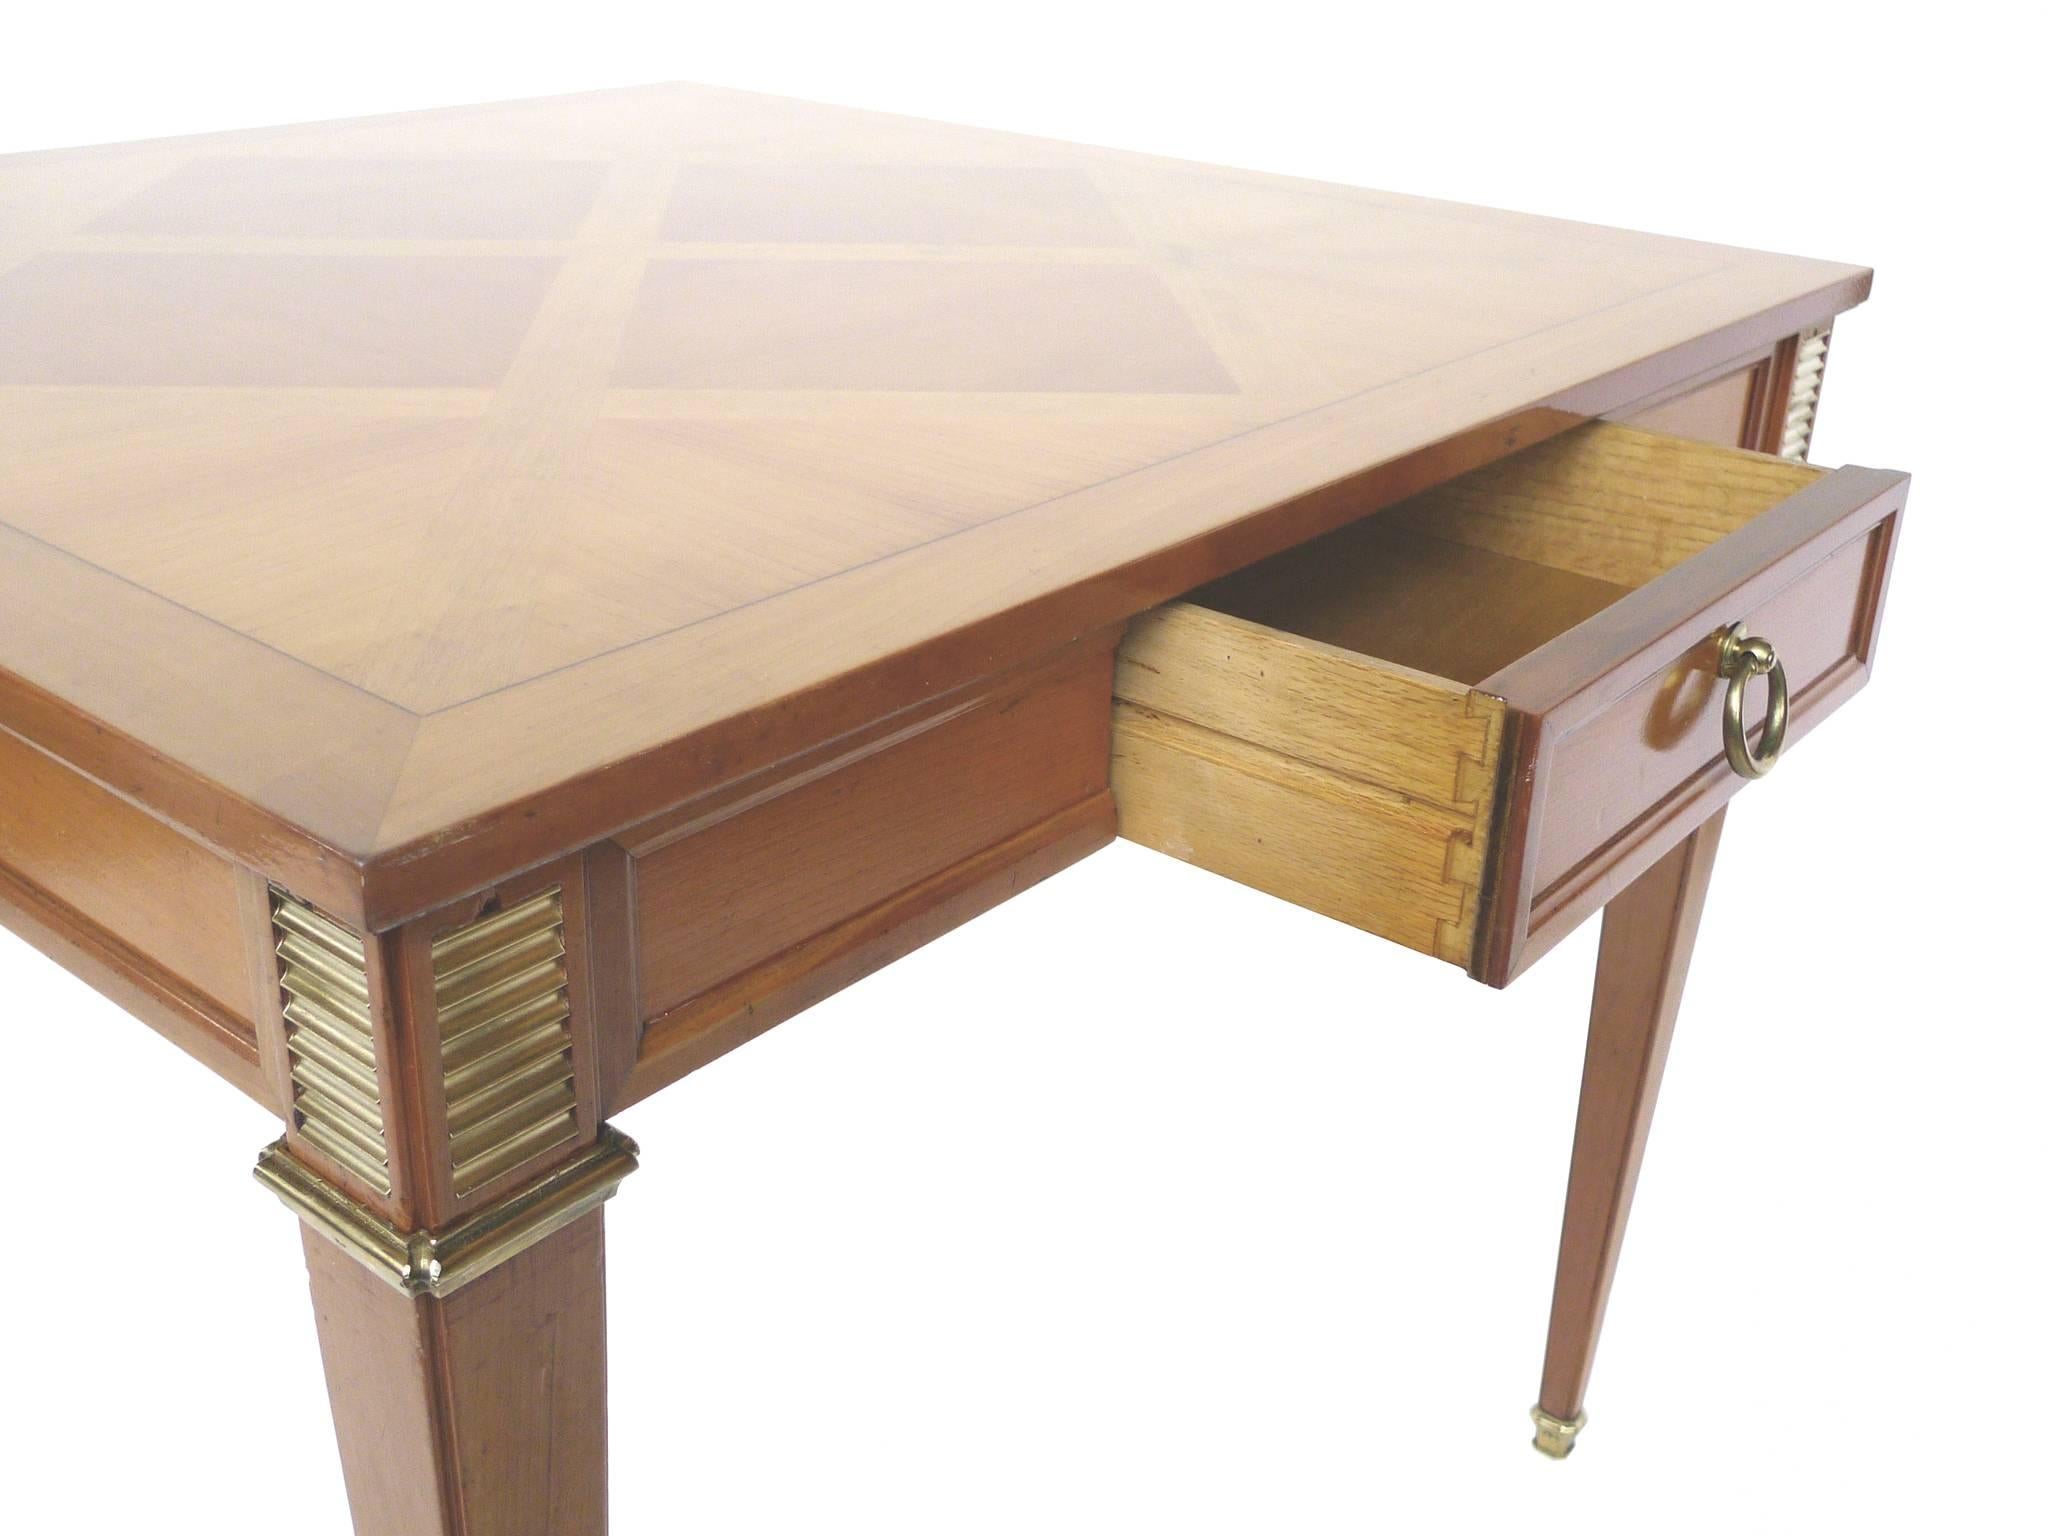 Modern Mid-20th Century Blond Mahogany Game Table by Baker Furniture